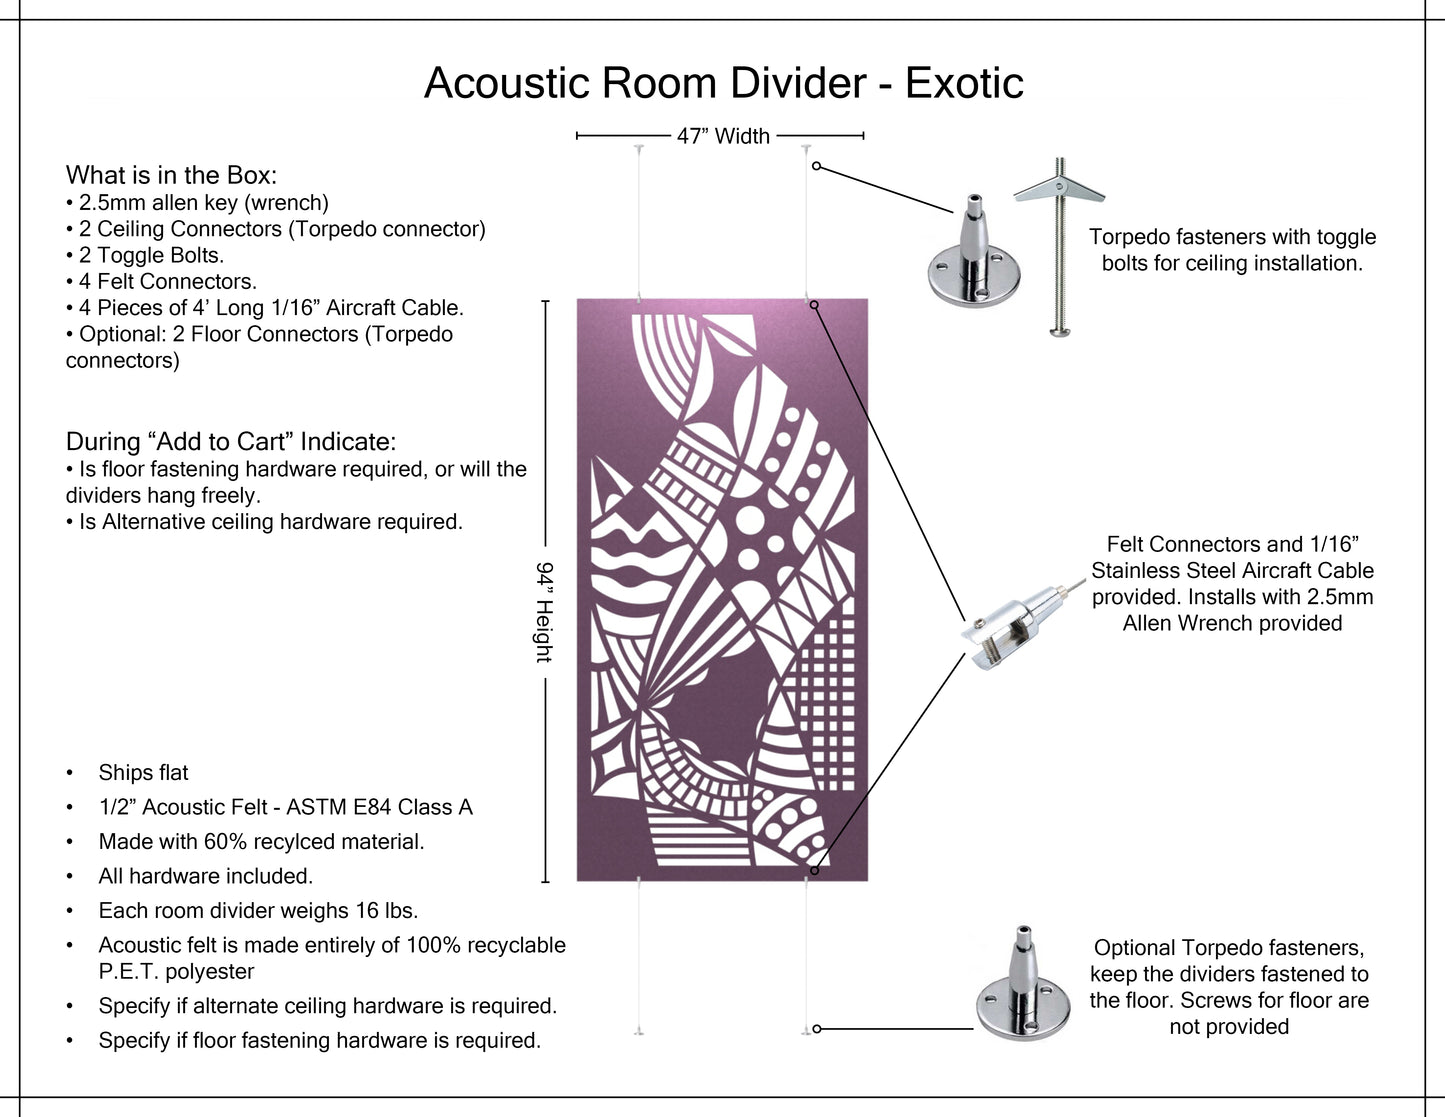 4x8 Acoustic Room Divider - Exotic